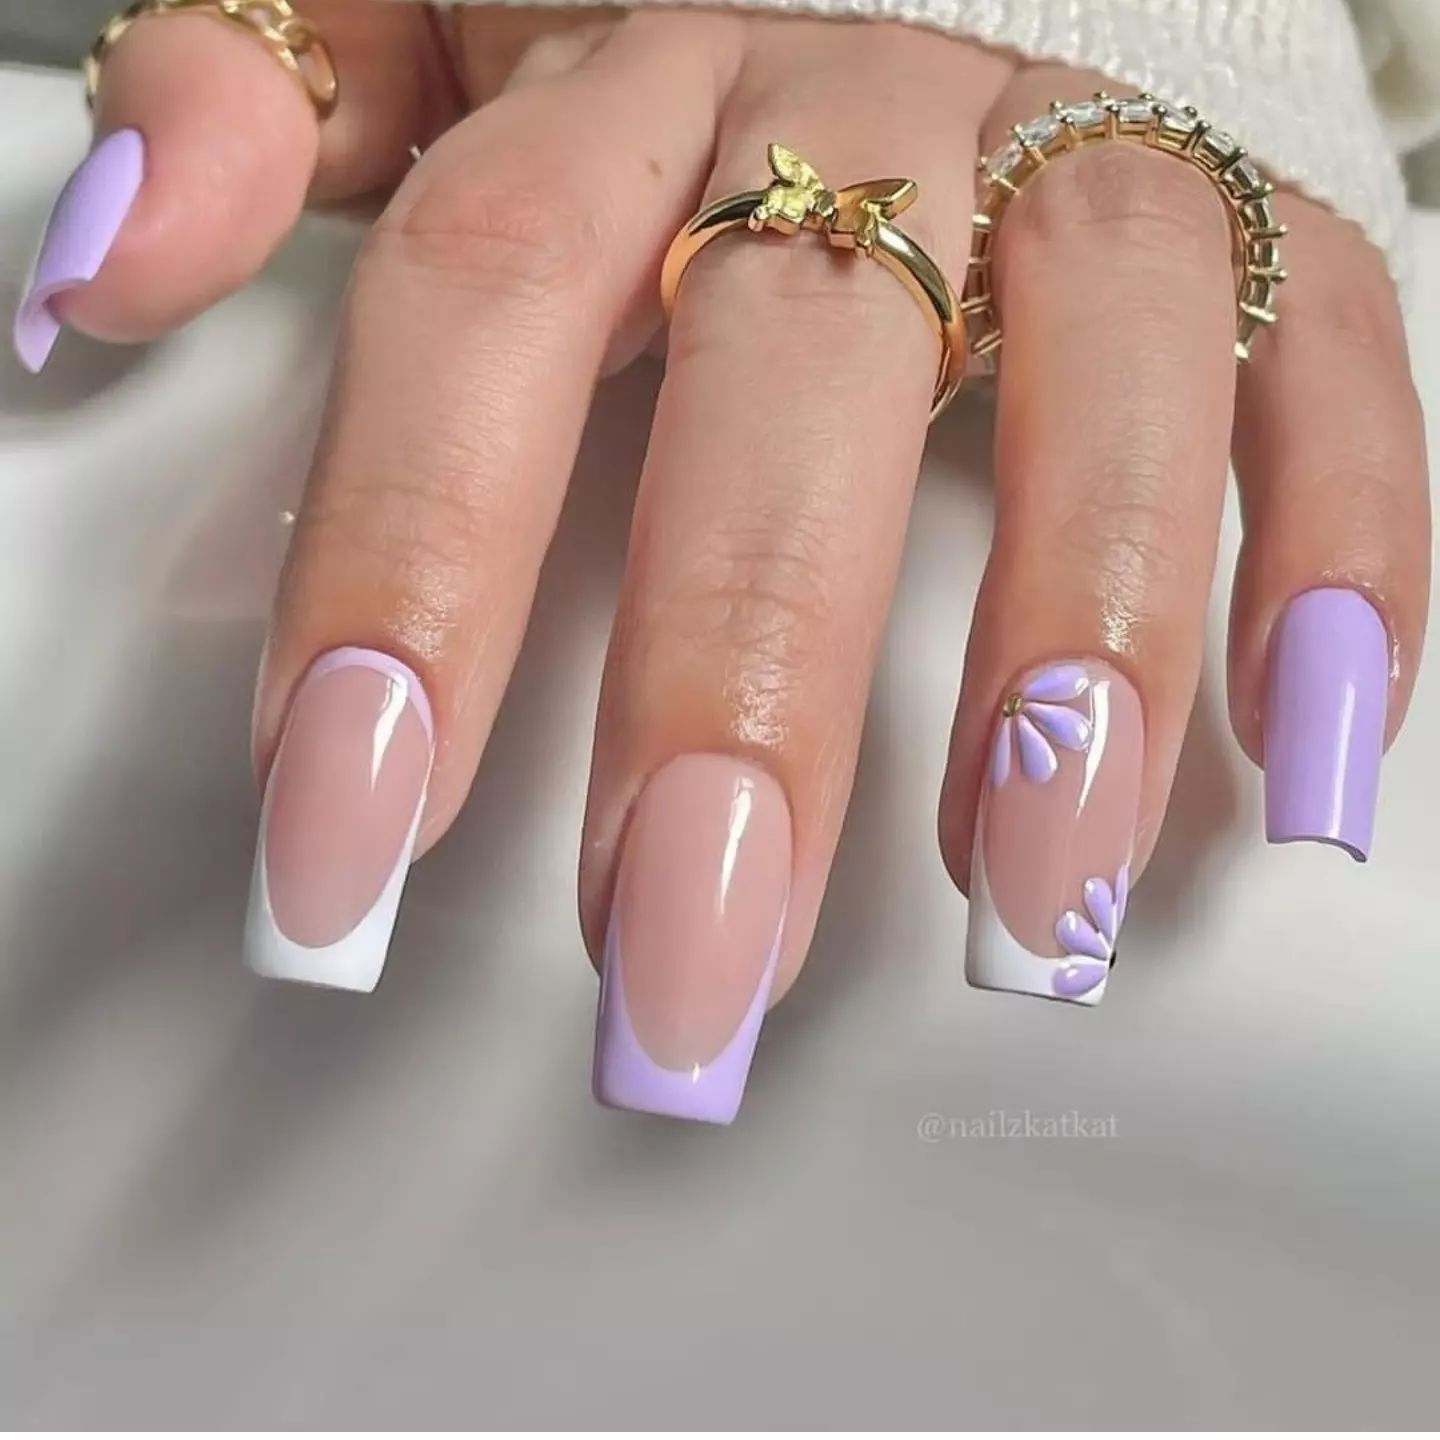 These are the cutest lilac and white French nails for the spring season! Women who enjoy flowers and soft glam ideas will fancy this mani the best! Heads up since it will take a skilled nail technician to achieve this outcome.